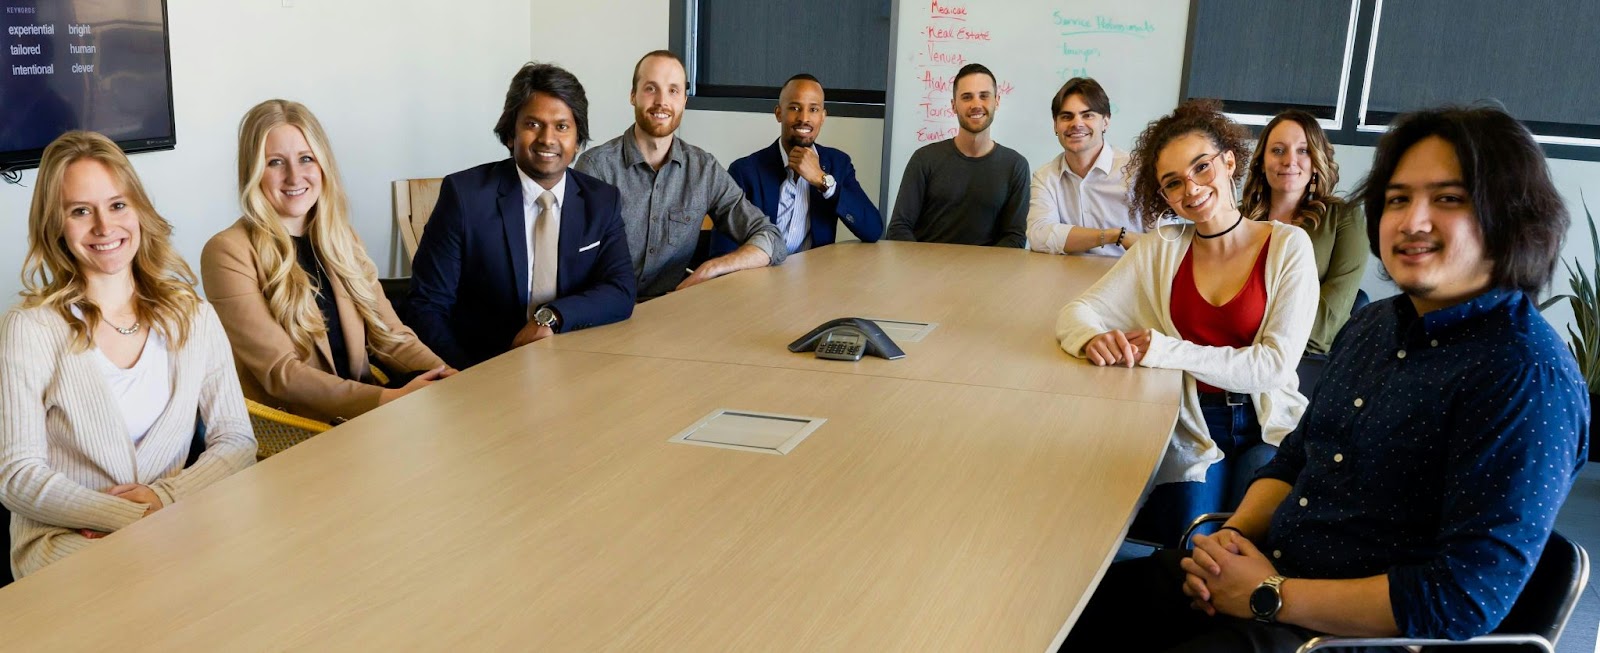 A group of employees of different races sited at a round table. They are all smiling. They were likely taking a company group photo. (Diversity tips blog)